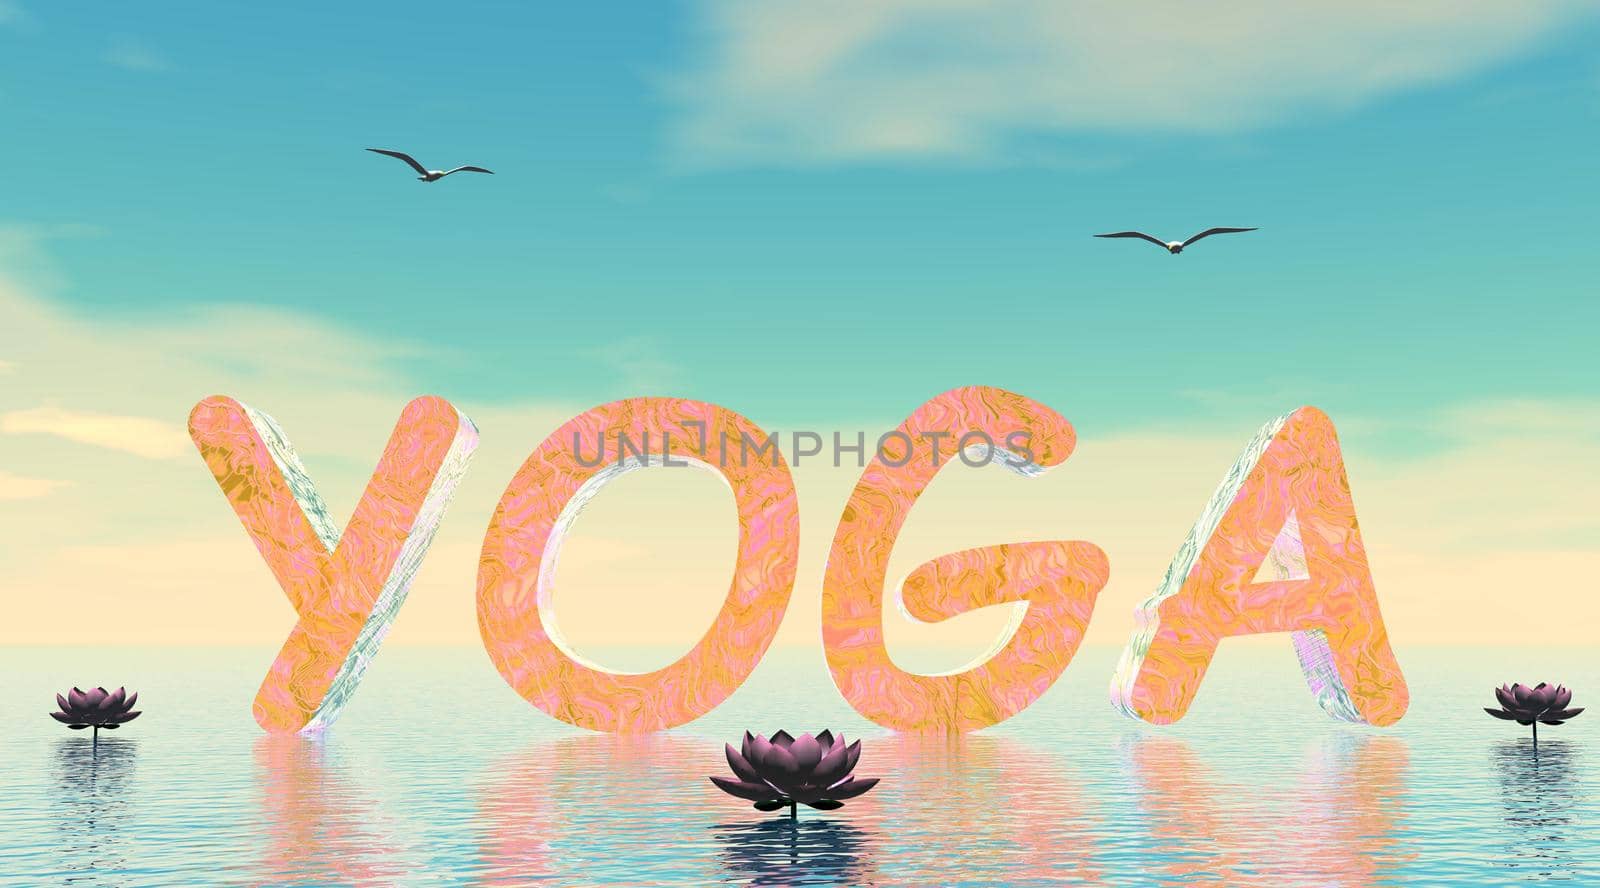 Yoga letters upon water next to lily flowers by beautiful day with seagulls